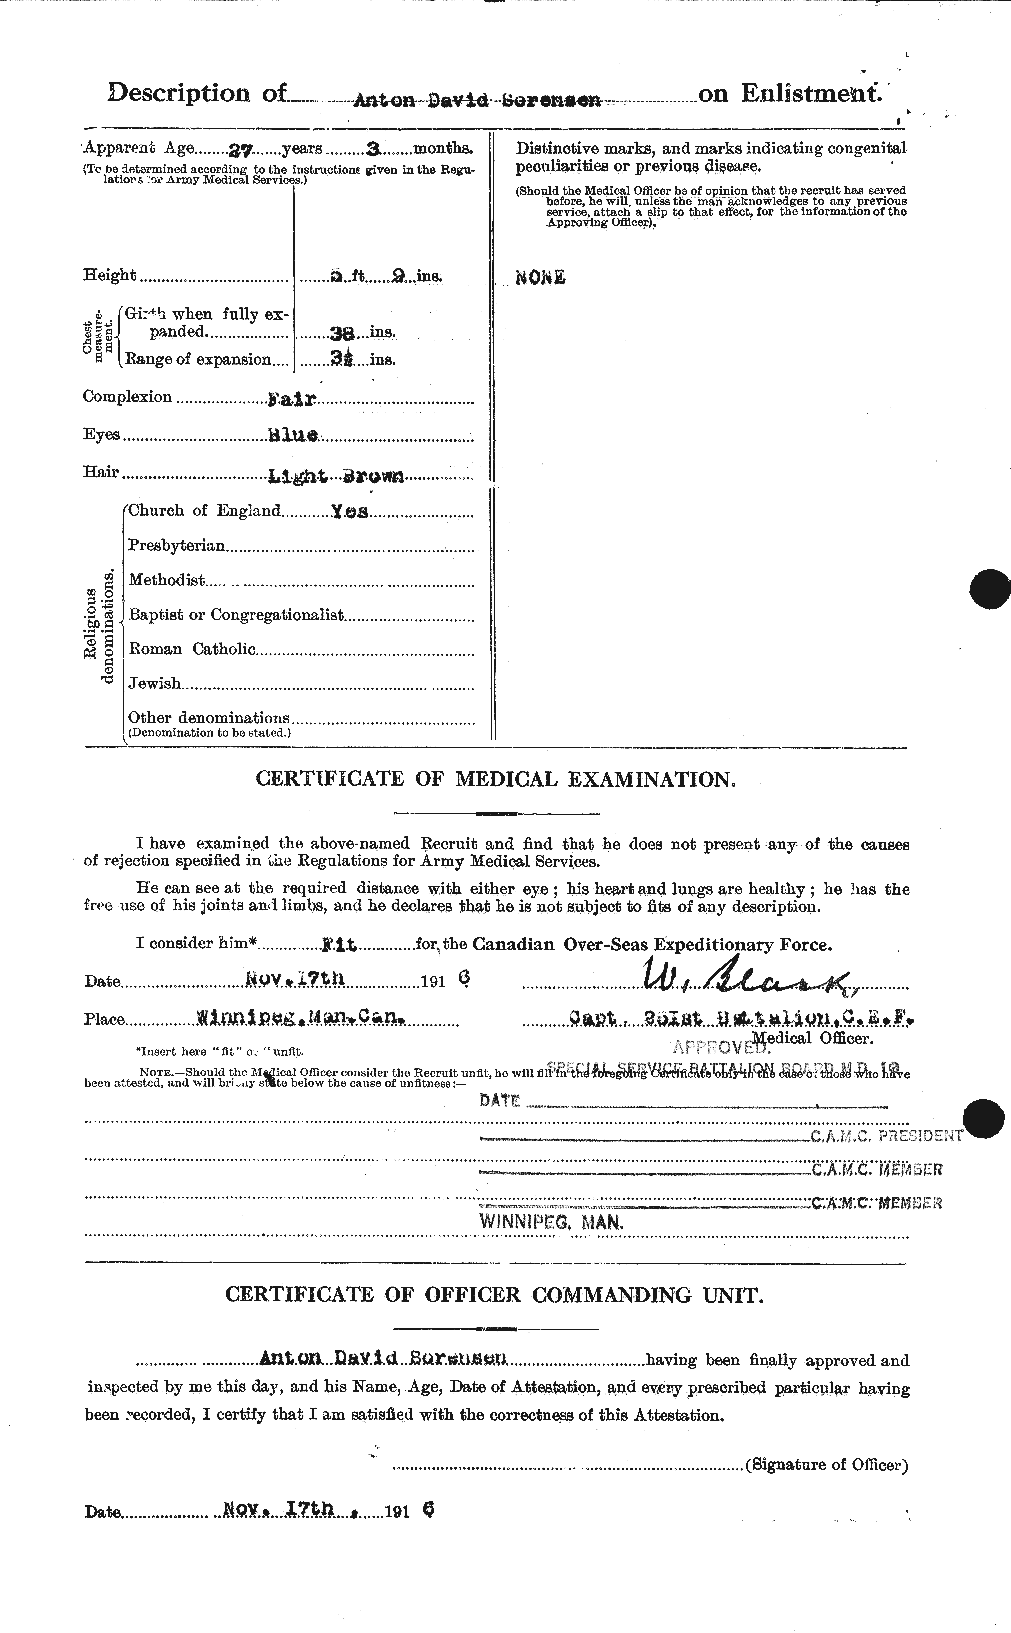 Personnel Records of the First World War - CEF 110168b